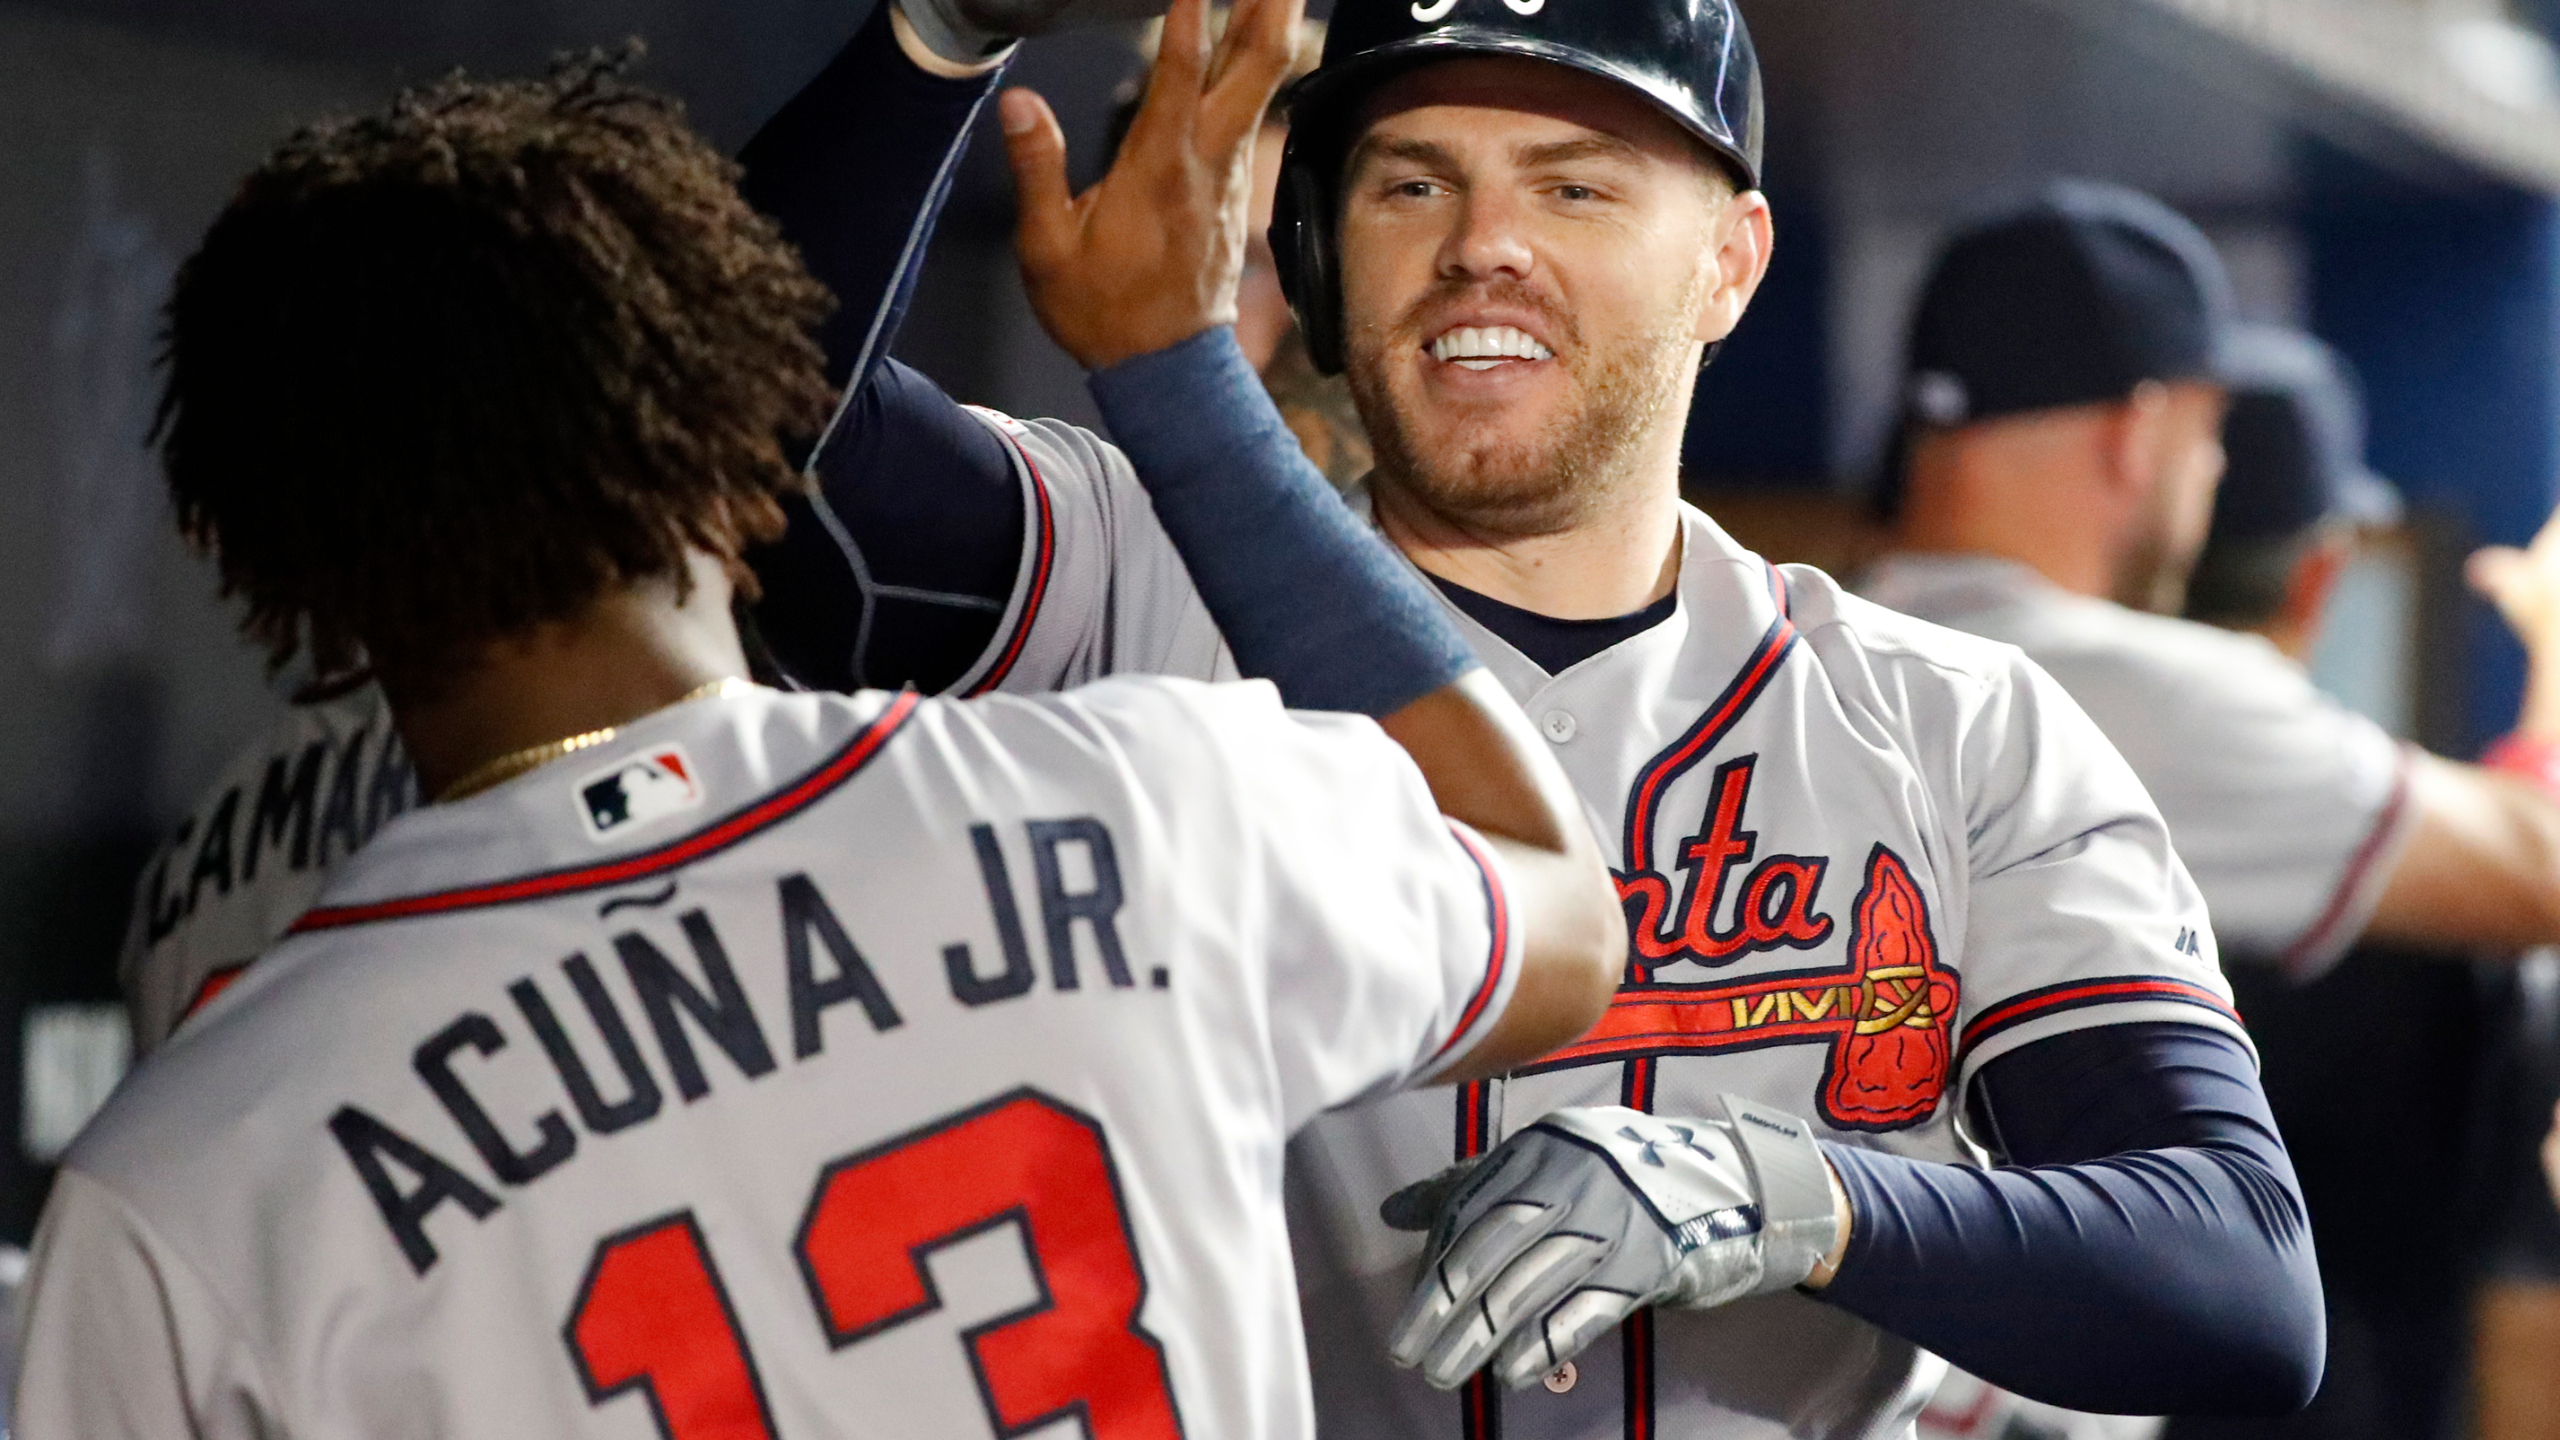 Jason Heyward gave Dansby Swanson perfect advice about leaving Braves